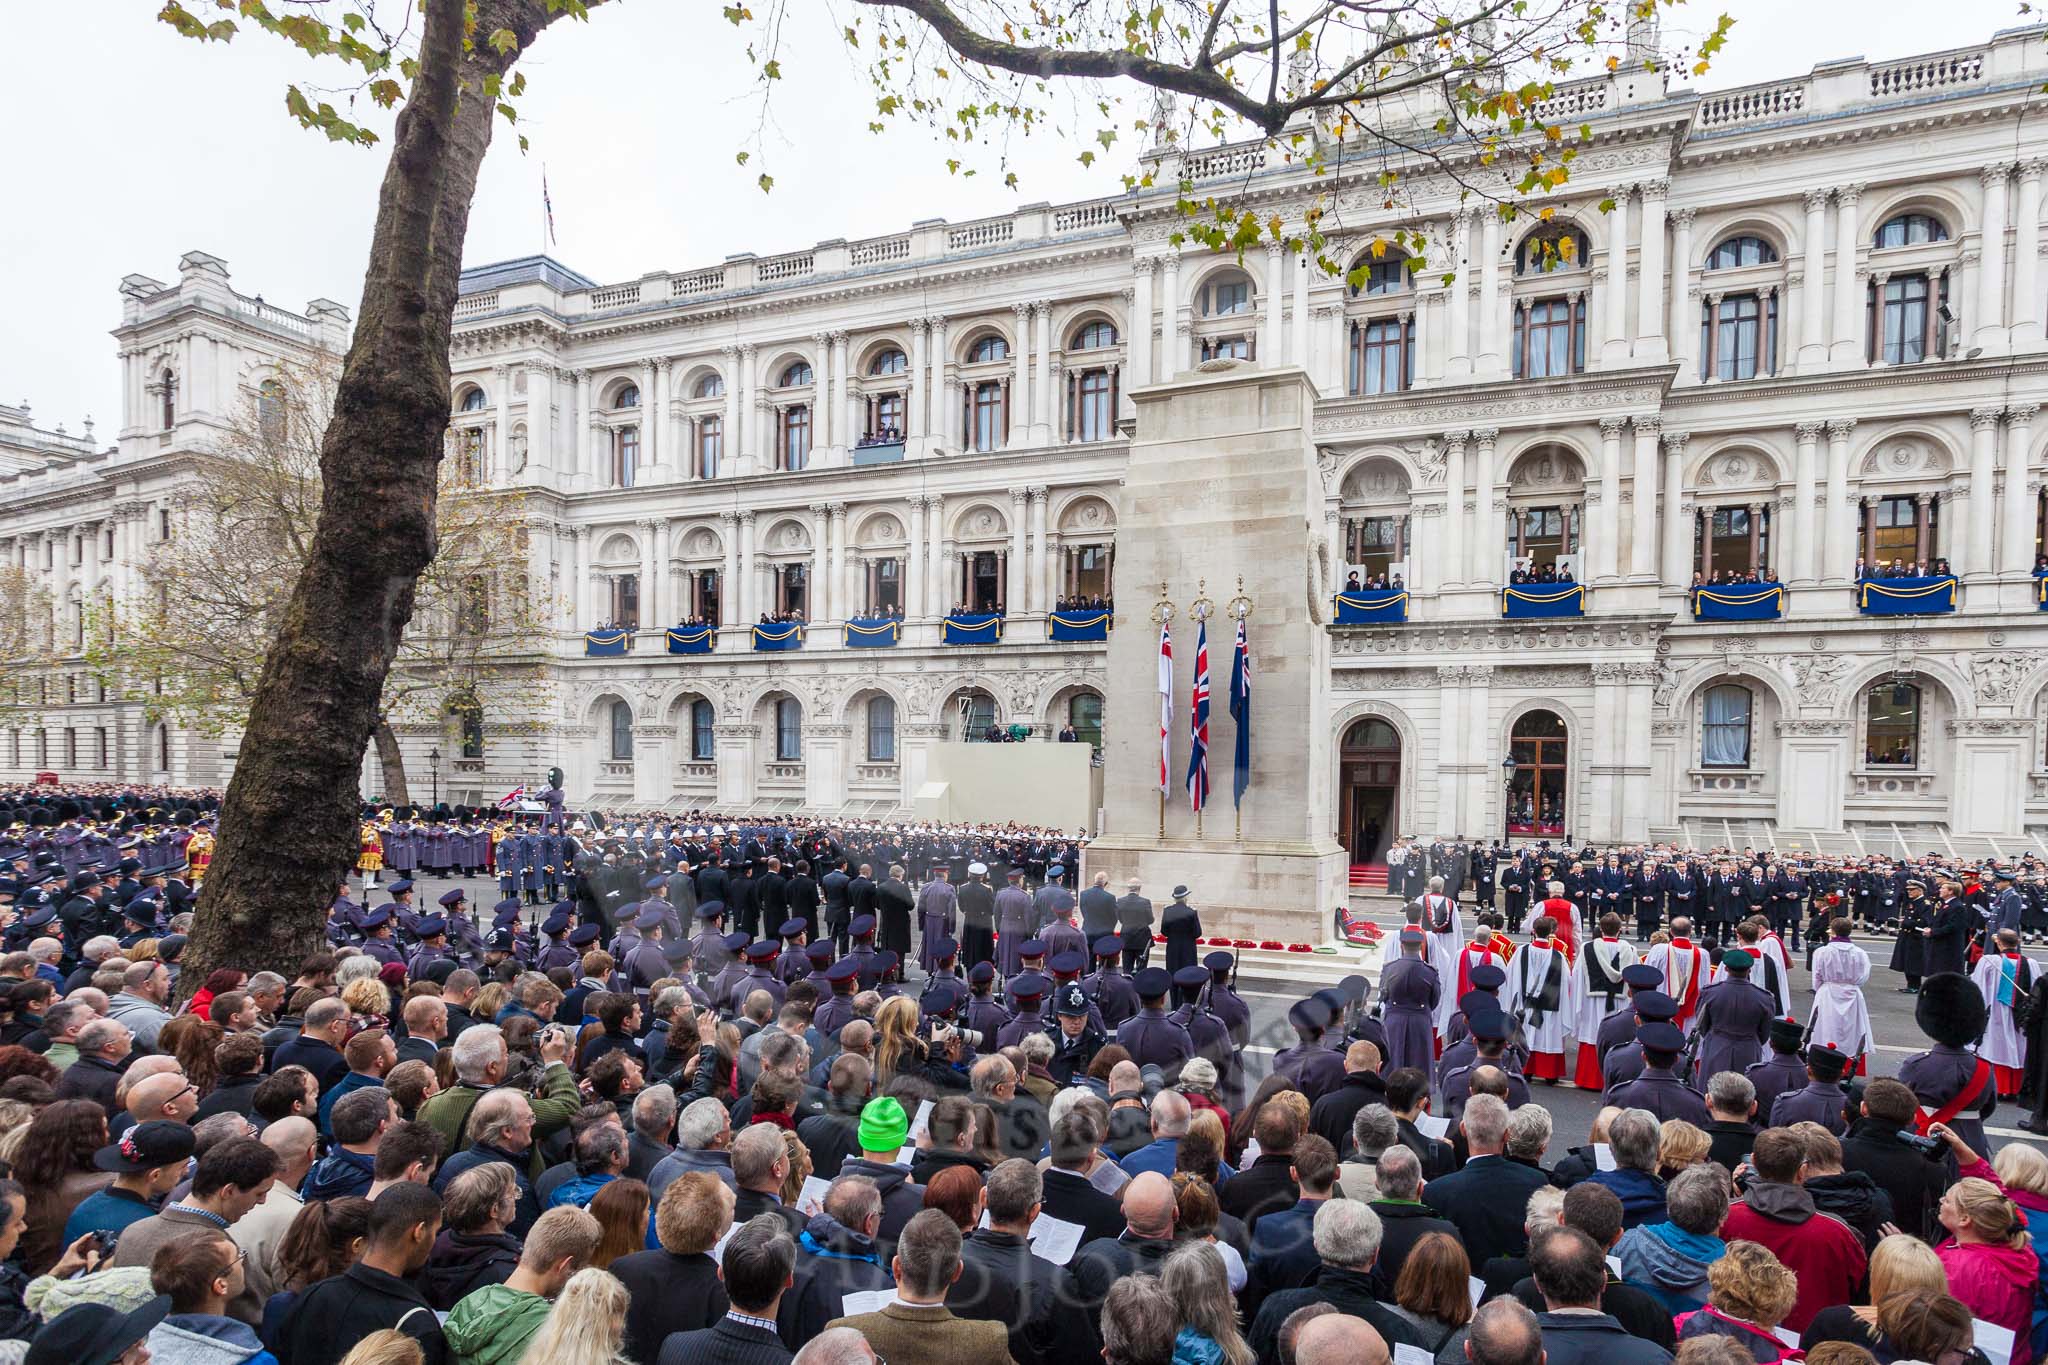 Remembrance Sunday at the Cenotaph 2015: Wide angle view of the Cenotaph ceremony from the press stand opposite the Foreign- and Commonwealth Office. Image #297, 08 November 2015 11:16 Whitehall, London, UK